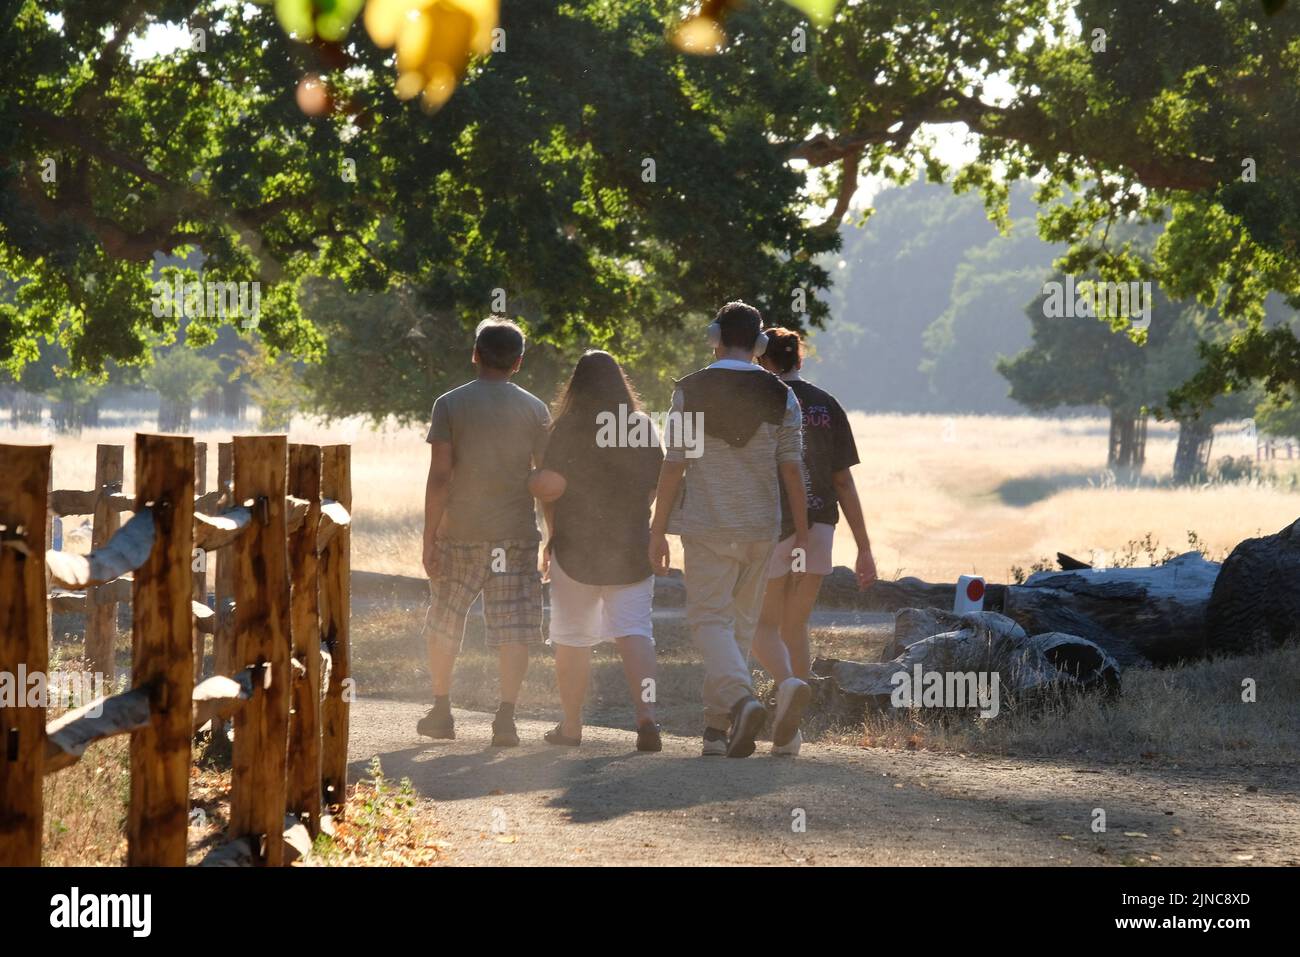 London, UK, 10th Aug, 2022.  A family enjoy an evening walk along a dusty path in Bushy Park in south-west London. After continuing hot, sunny conditions, with the driest July on record has left the park with large areas of yellowing grass. An Amber Extreme heat warning was issued by the Met Office this week as temperatures are expected to reach mid-30 degrees celsius.  Credit: Eleventh Hour Photography/Alamy Live News Stock Photo